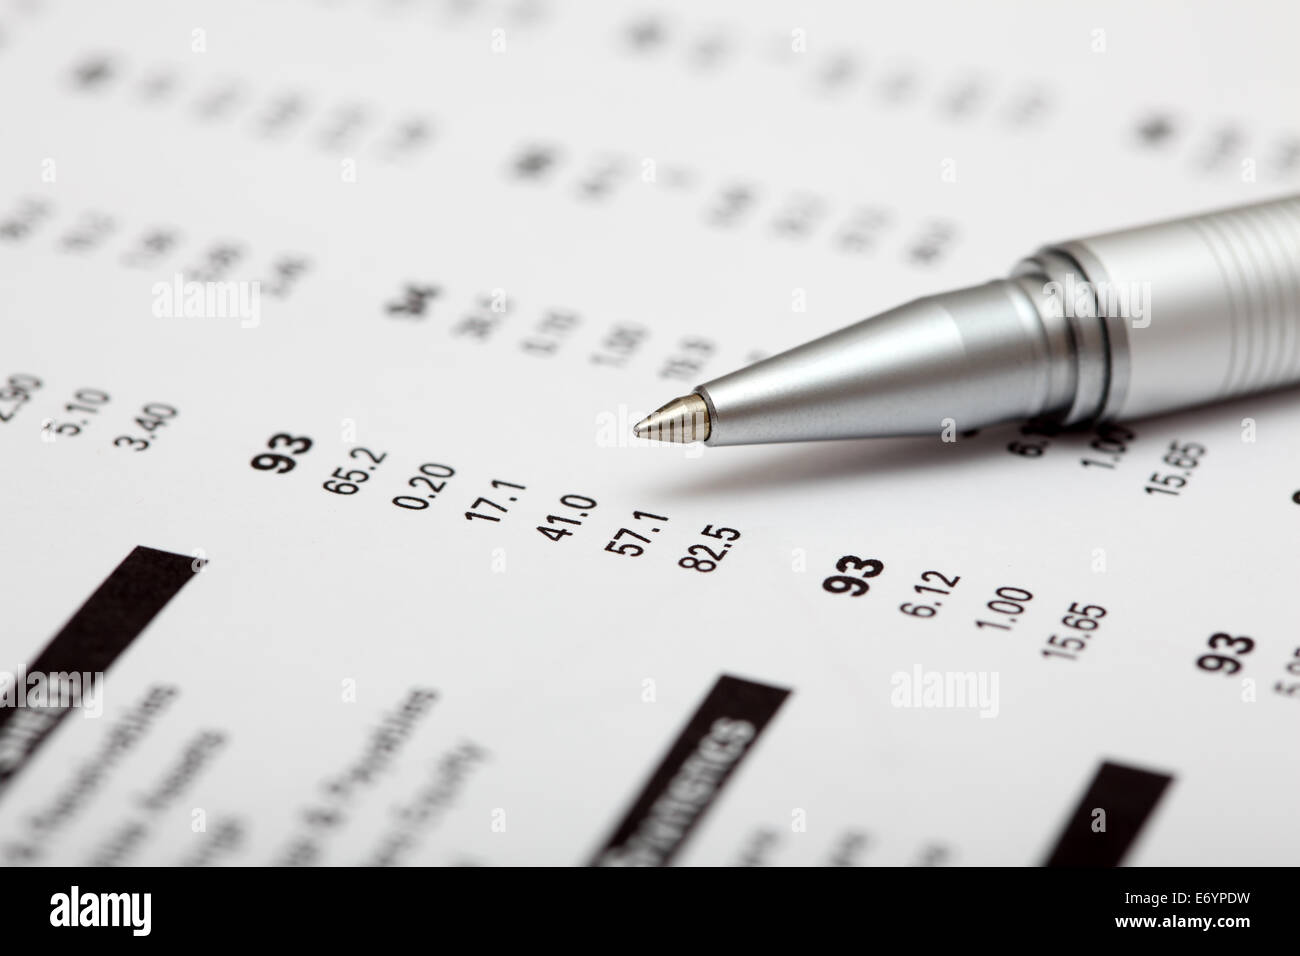 Analysis of financial statements. Focus on pen. Shallow depth of field. Closeup. Stock Photo